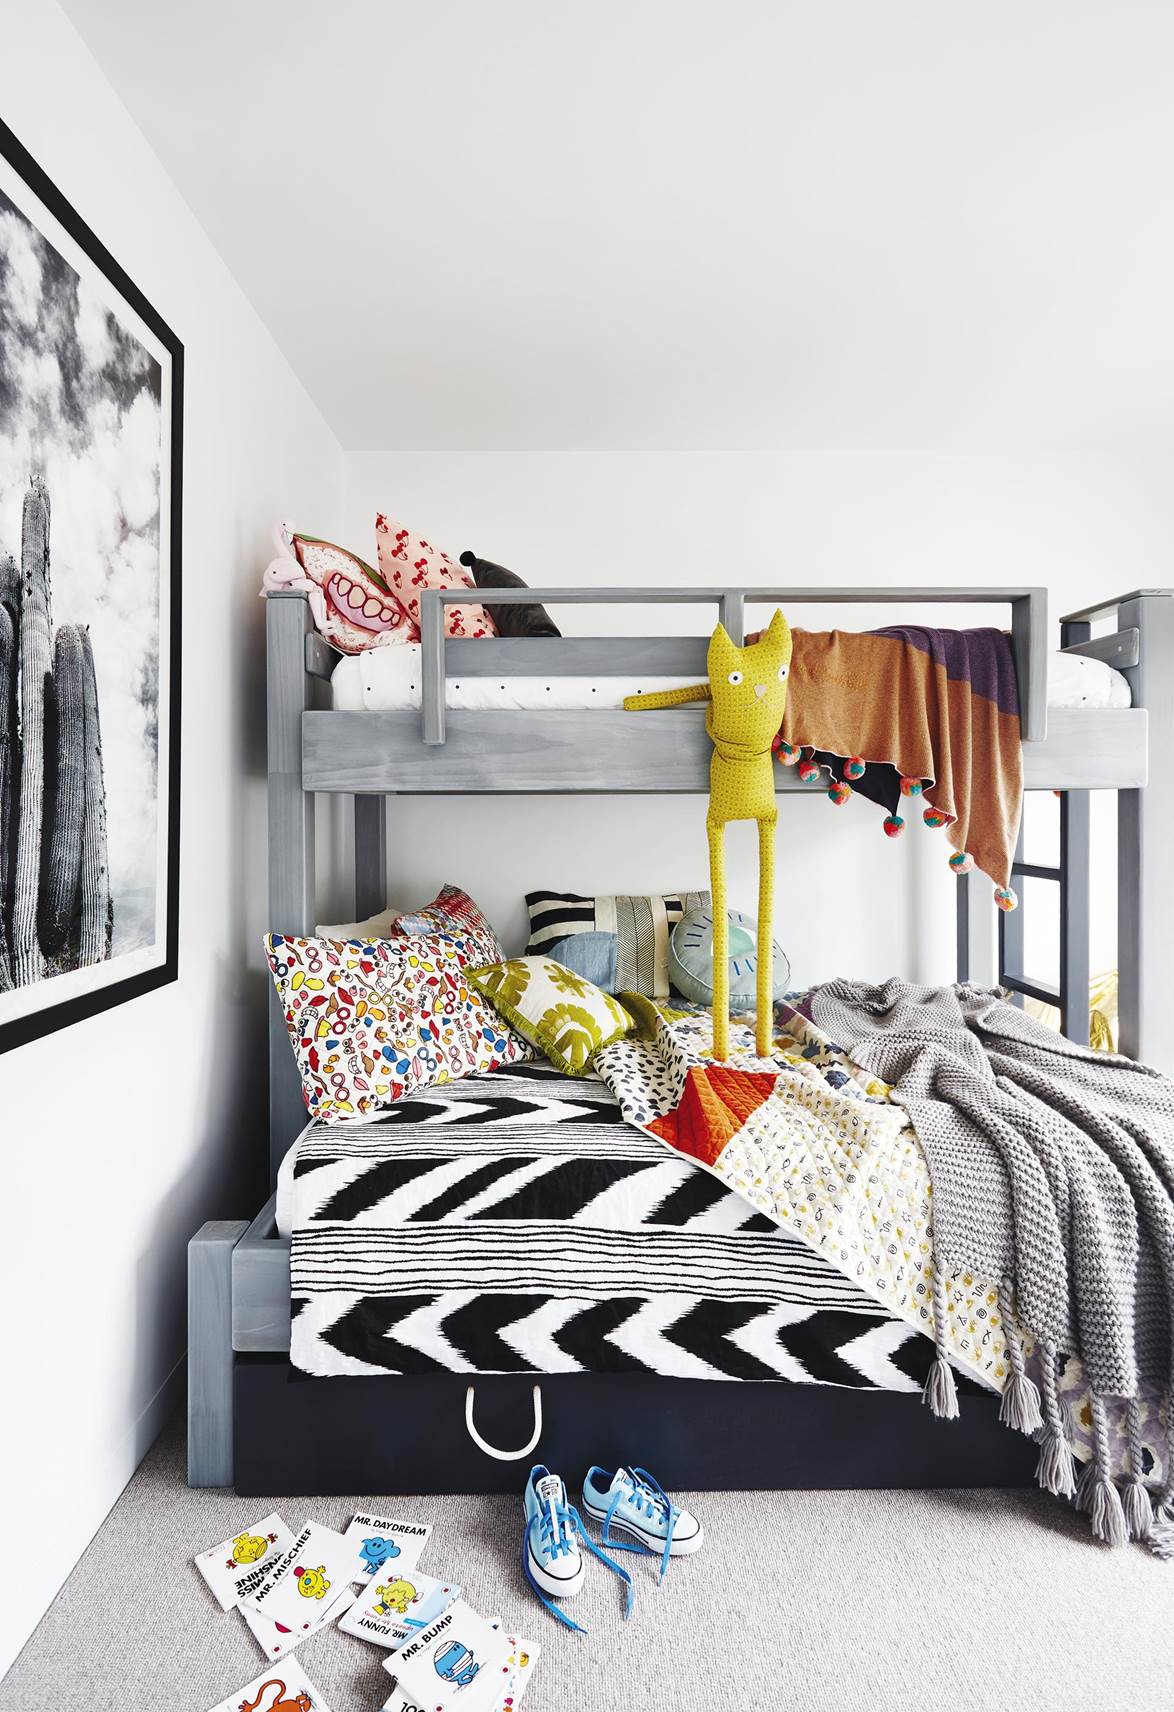 The kids' bedroom within a coastal abode features a bunk bed with a stowaway trundle. It maximizes space while fun, colorful furnishings create a comfy retreat for the kids.